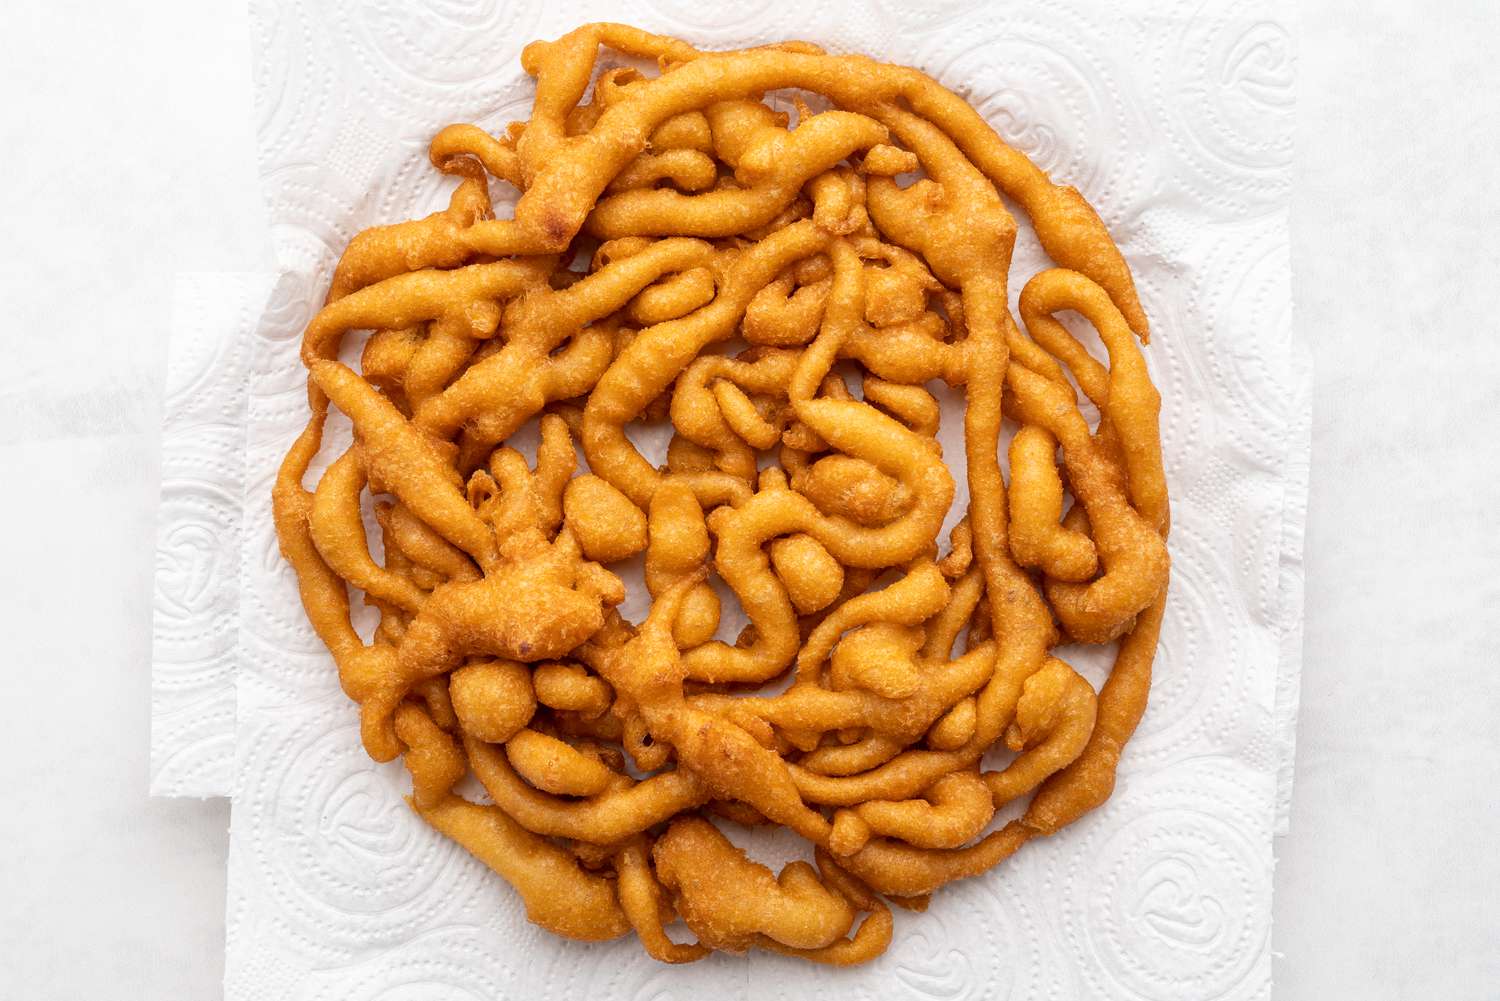 Golden brown funnel cake lying on paper towels